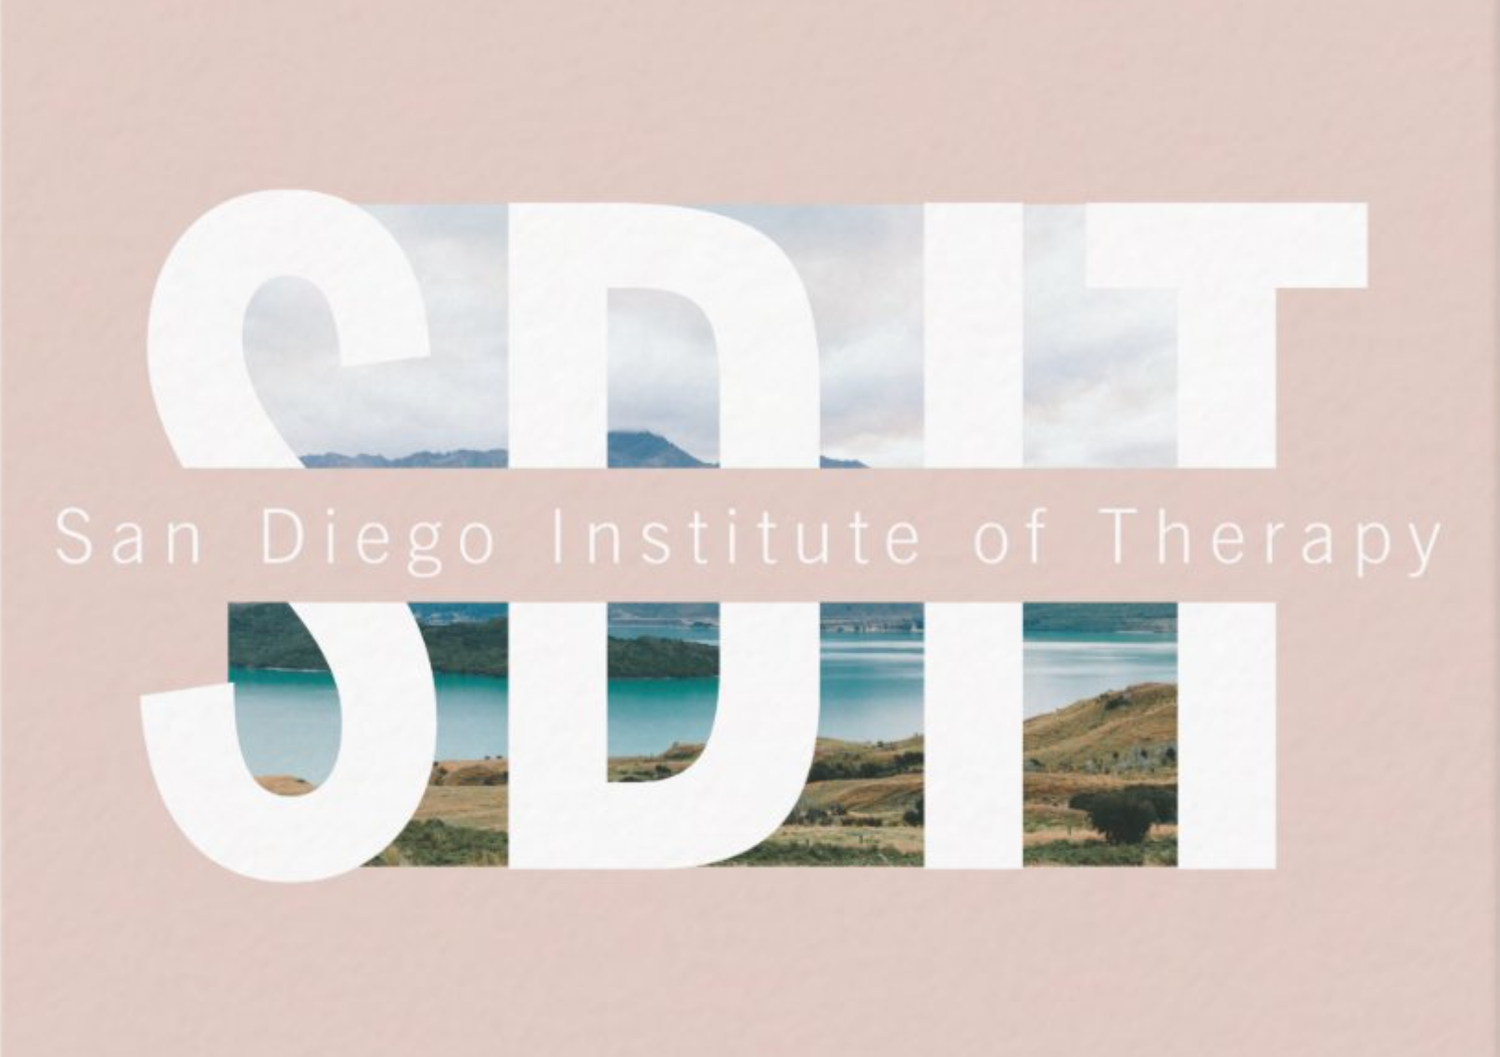 San Diego Institute of Therapy